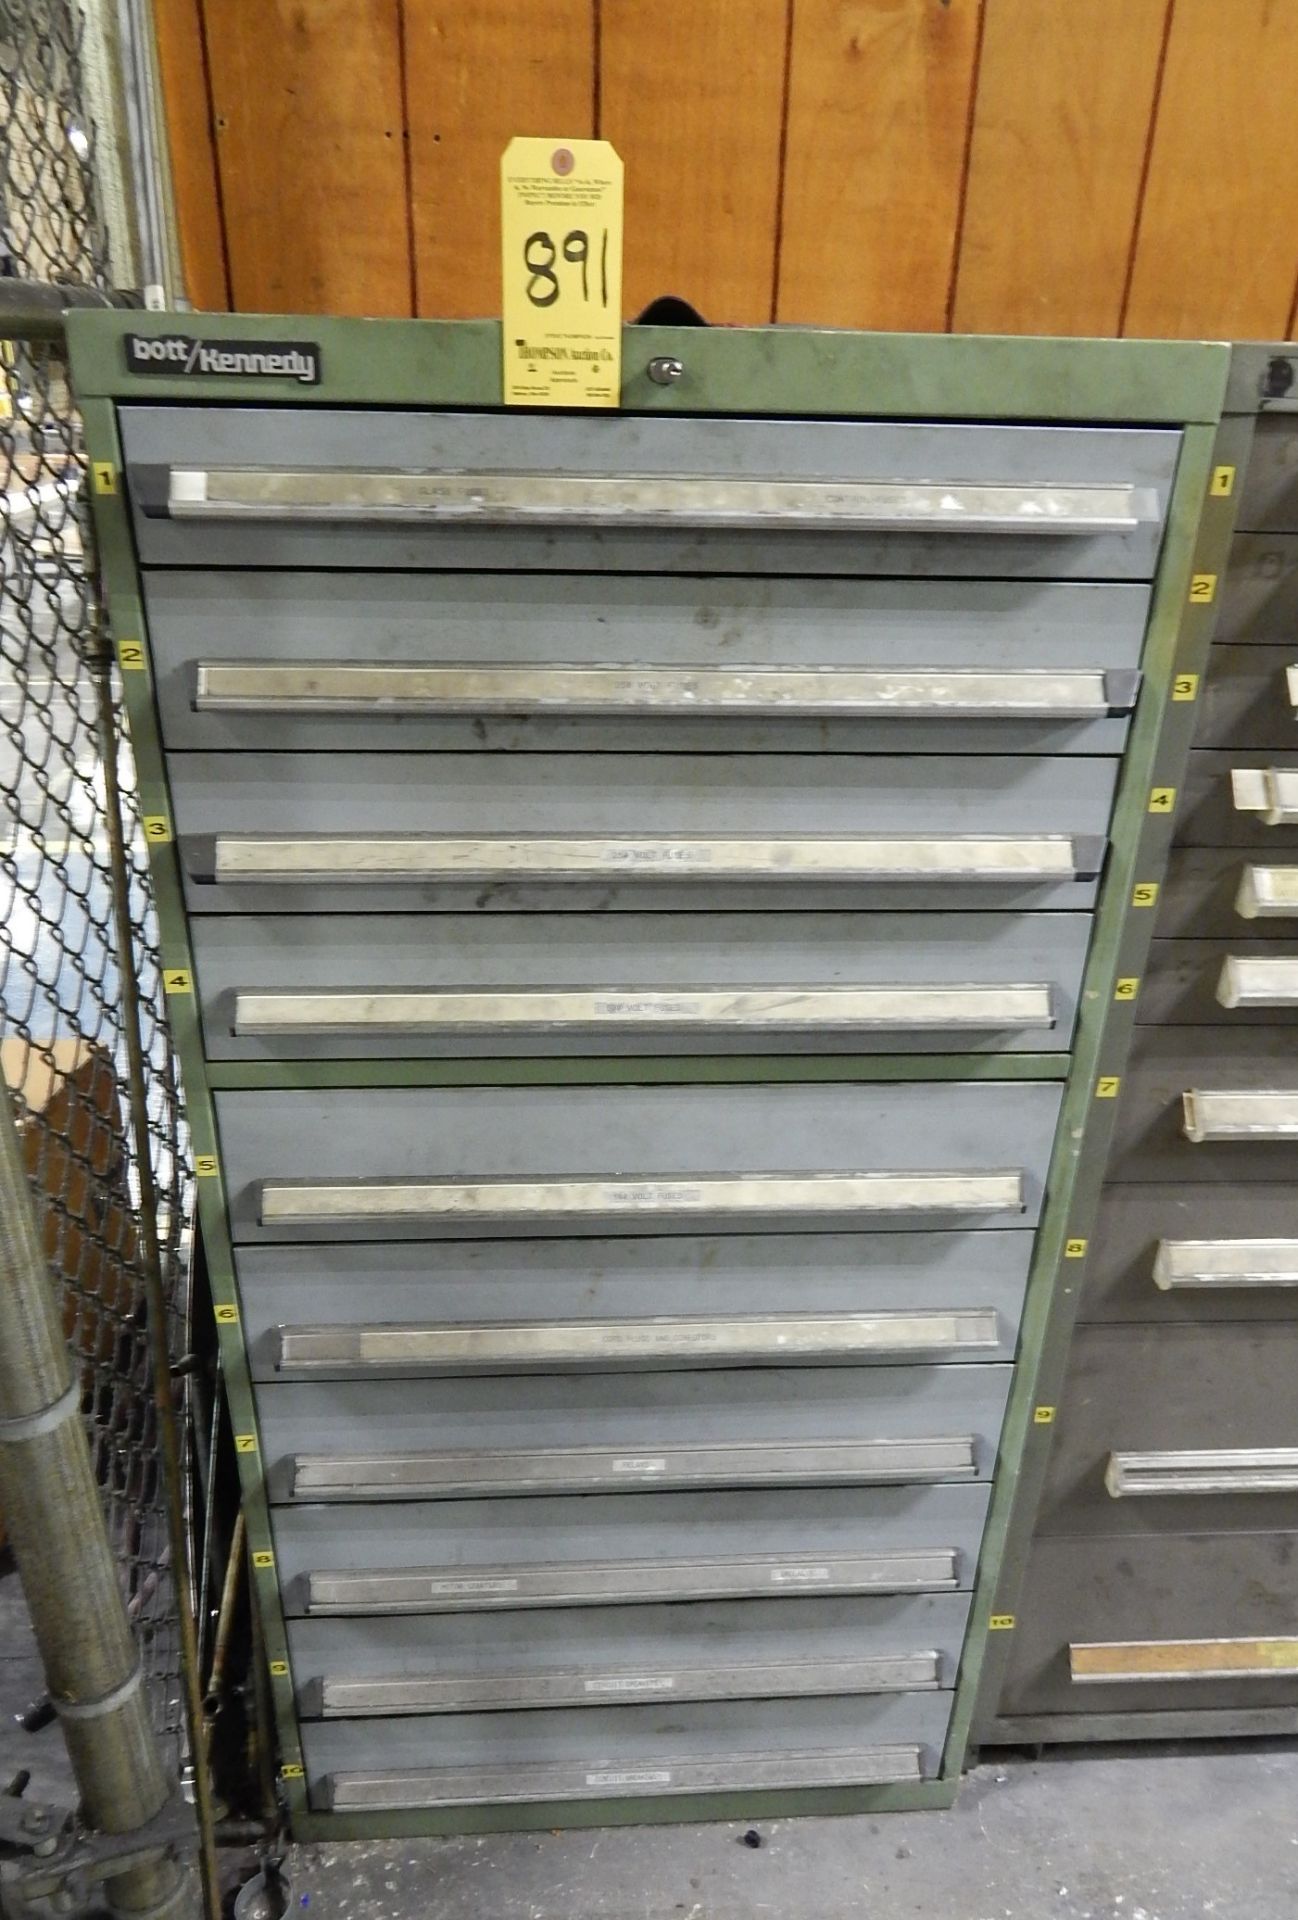 Bott/Kennedy Tool Cabinet, 10 Drawer, Plus Contents of Electrical Items and Fuses